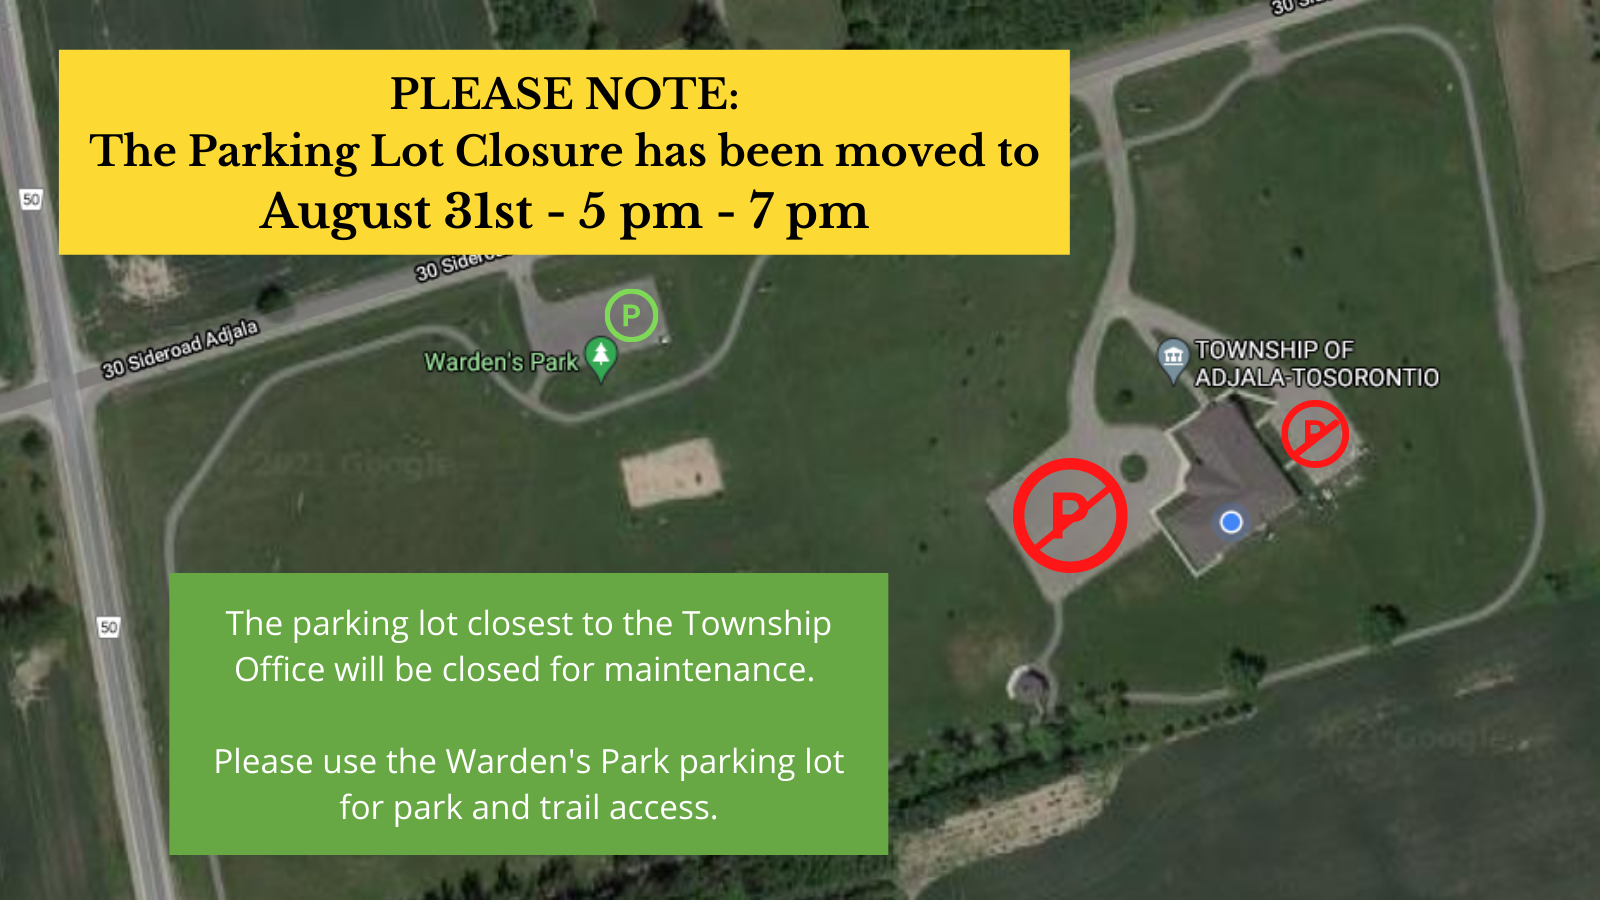 Notice of Parking Lot closure at Township Office